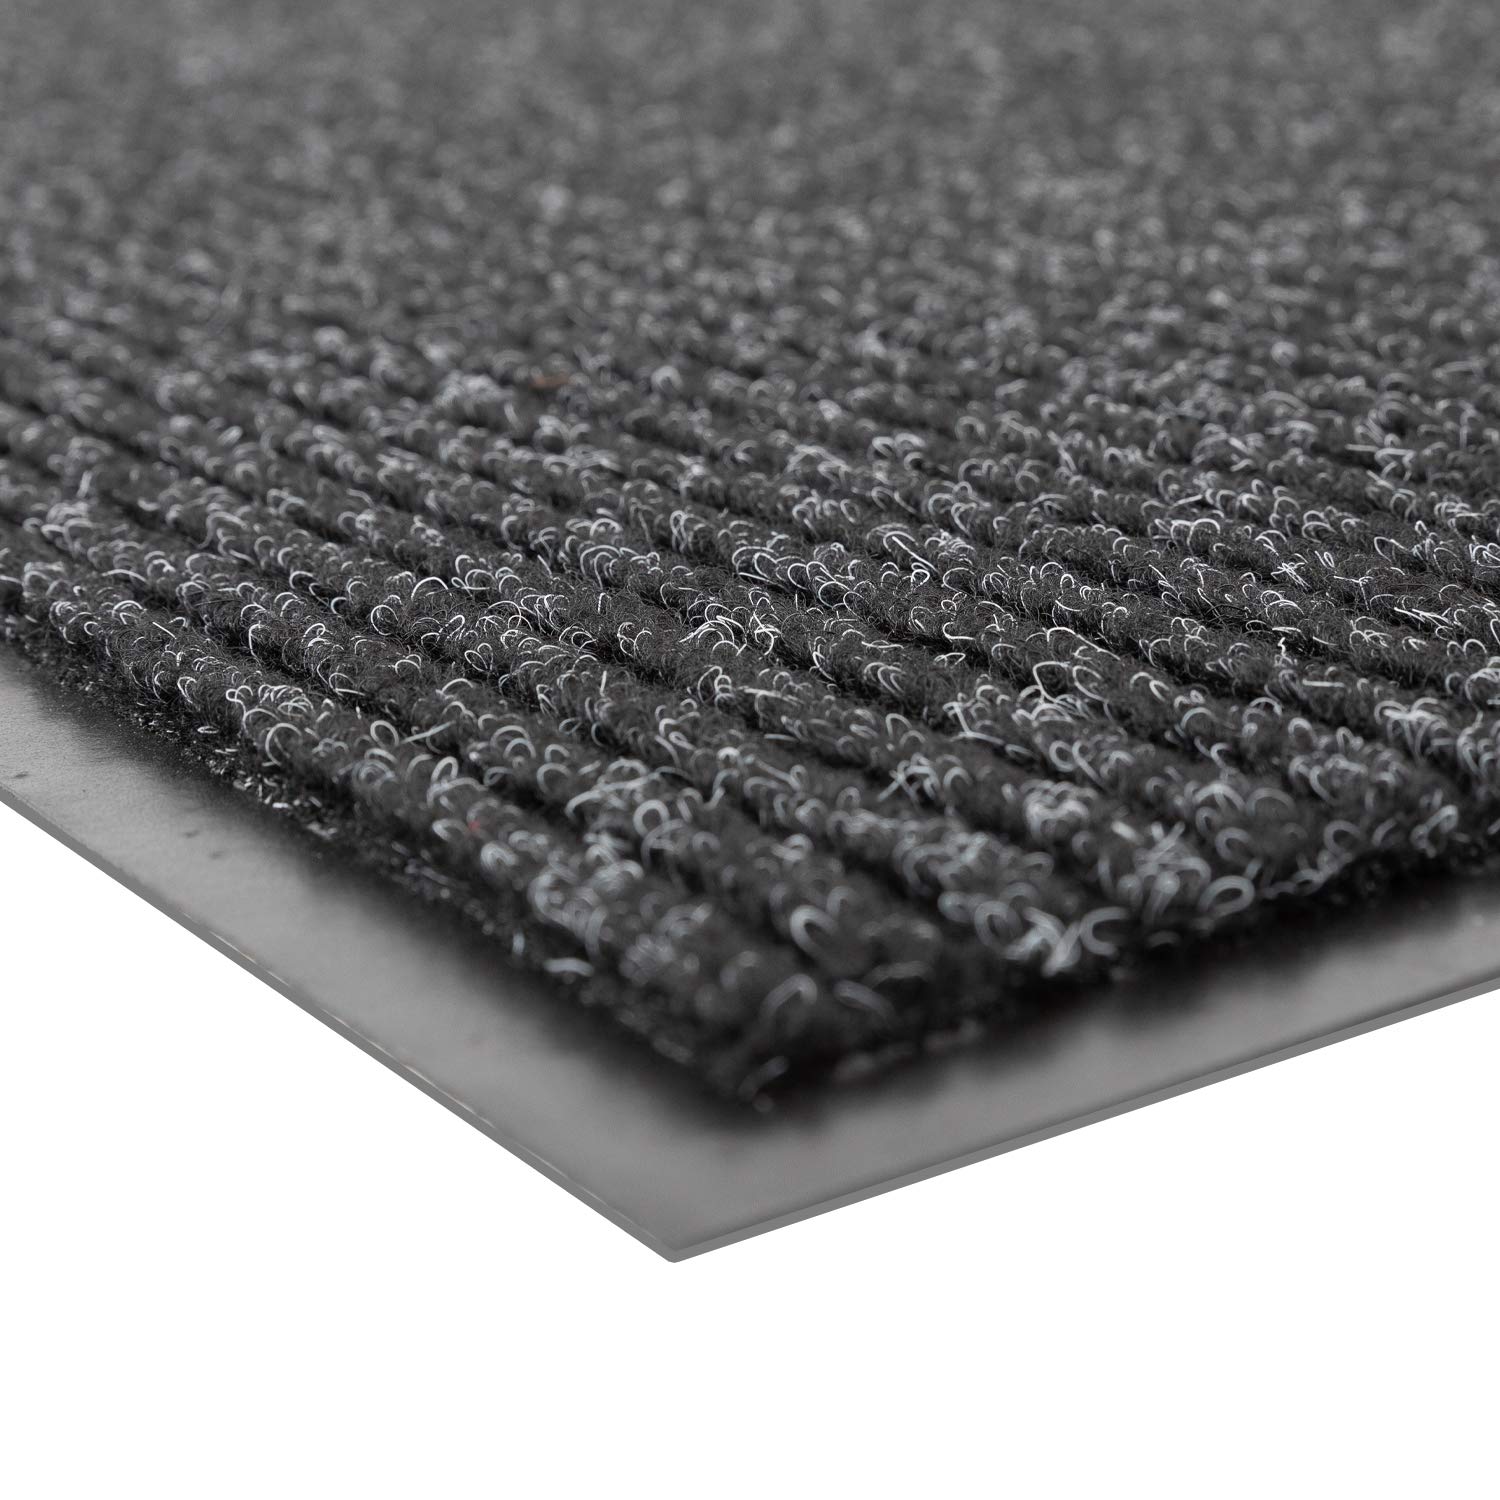 Notrax 109 Brush Step Entrance Mat, 3 X 10, Charcoal (109S0310Ch)